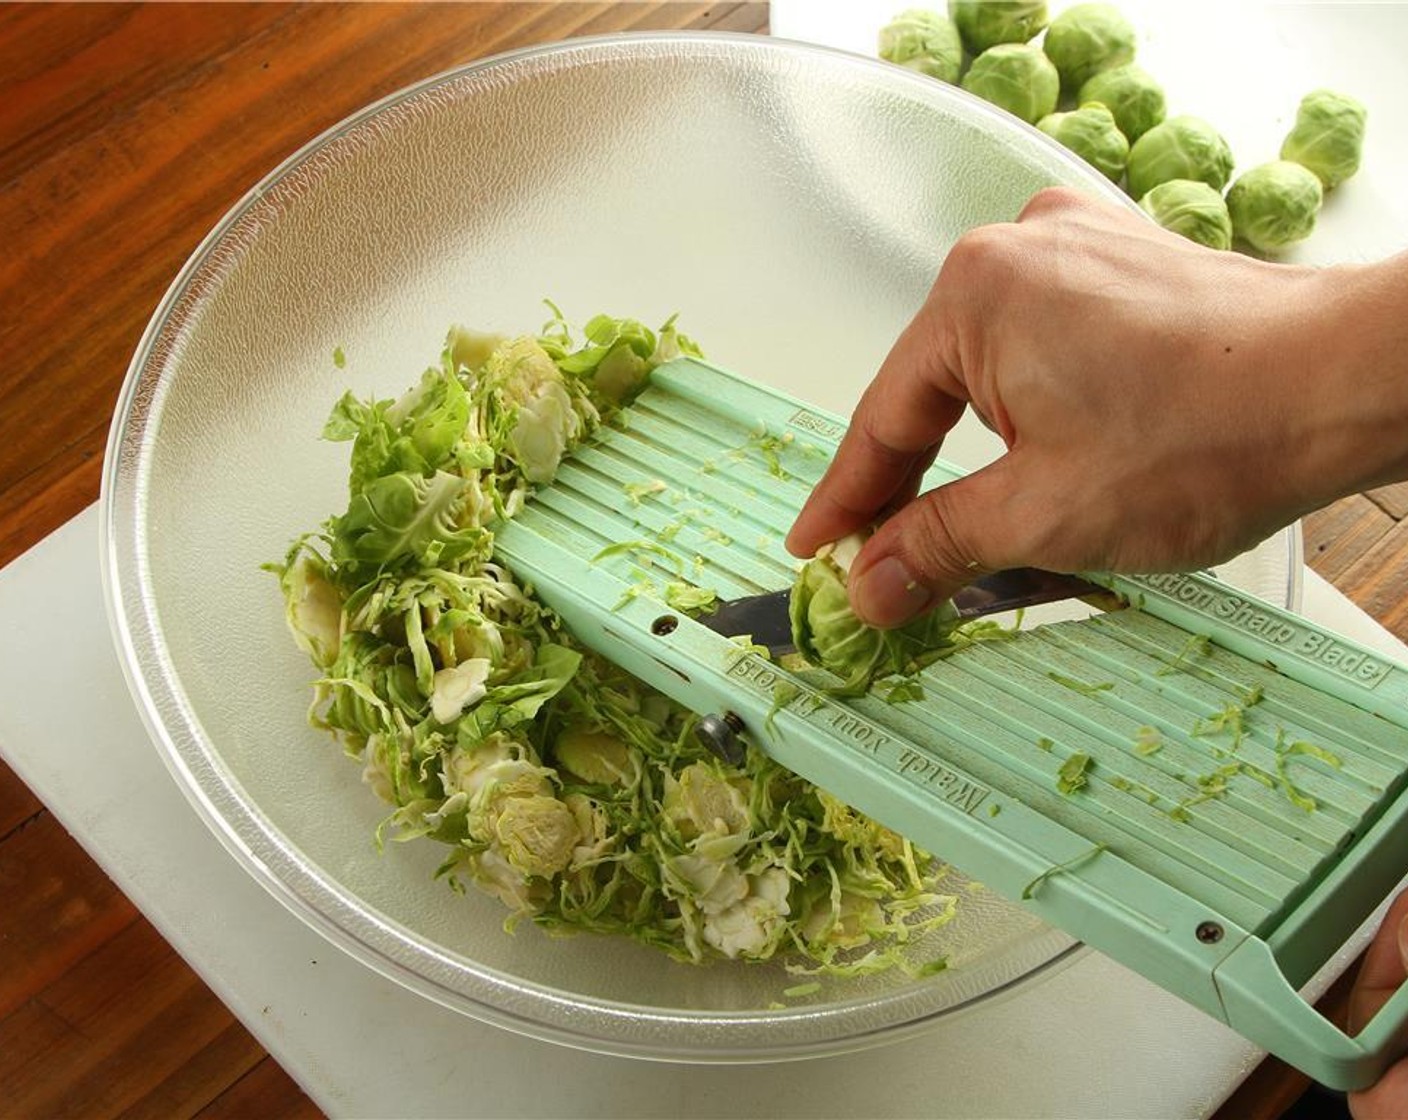 step 2 Using a mandoline, hold the brussels sprouts by the stem and thinly slice them into a large bowl. If you do not have a mandoline, hold the brussels sprouts by the stem and thinly slice them with a sharp knife.